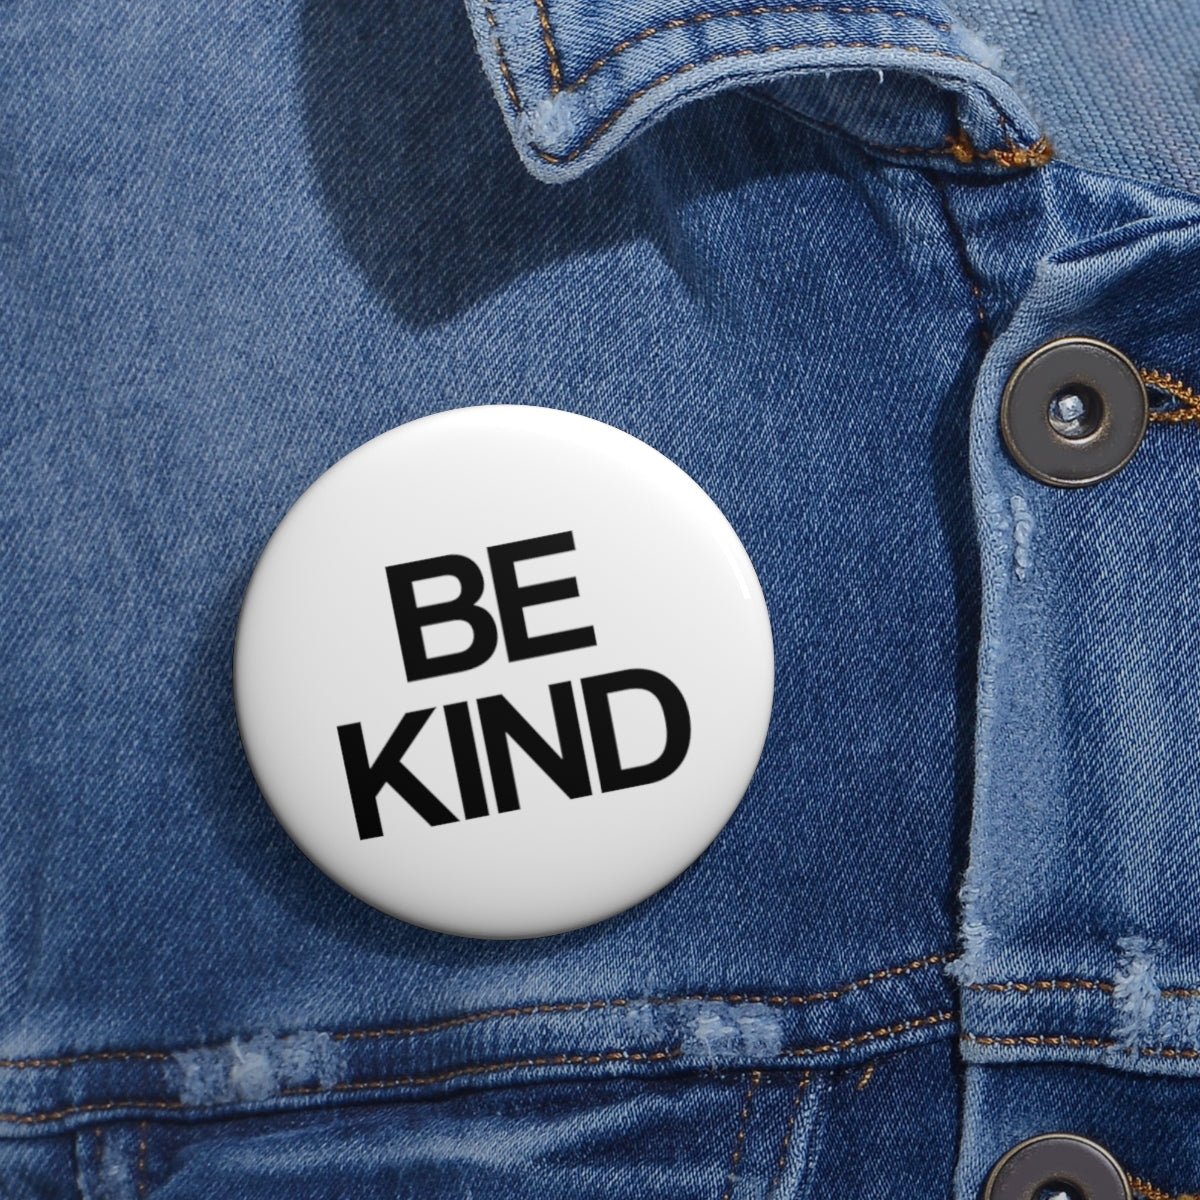 Be Kind Pin Button Badge, bee kind, choose kind, cool to be kind school backpack button Sign Starcove Fashion